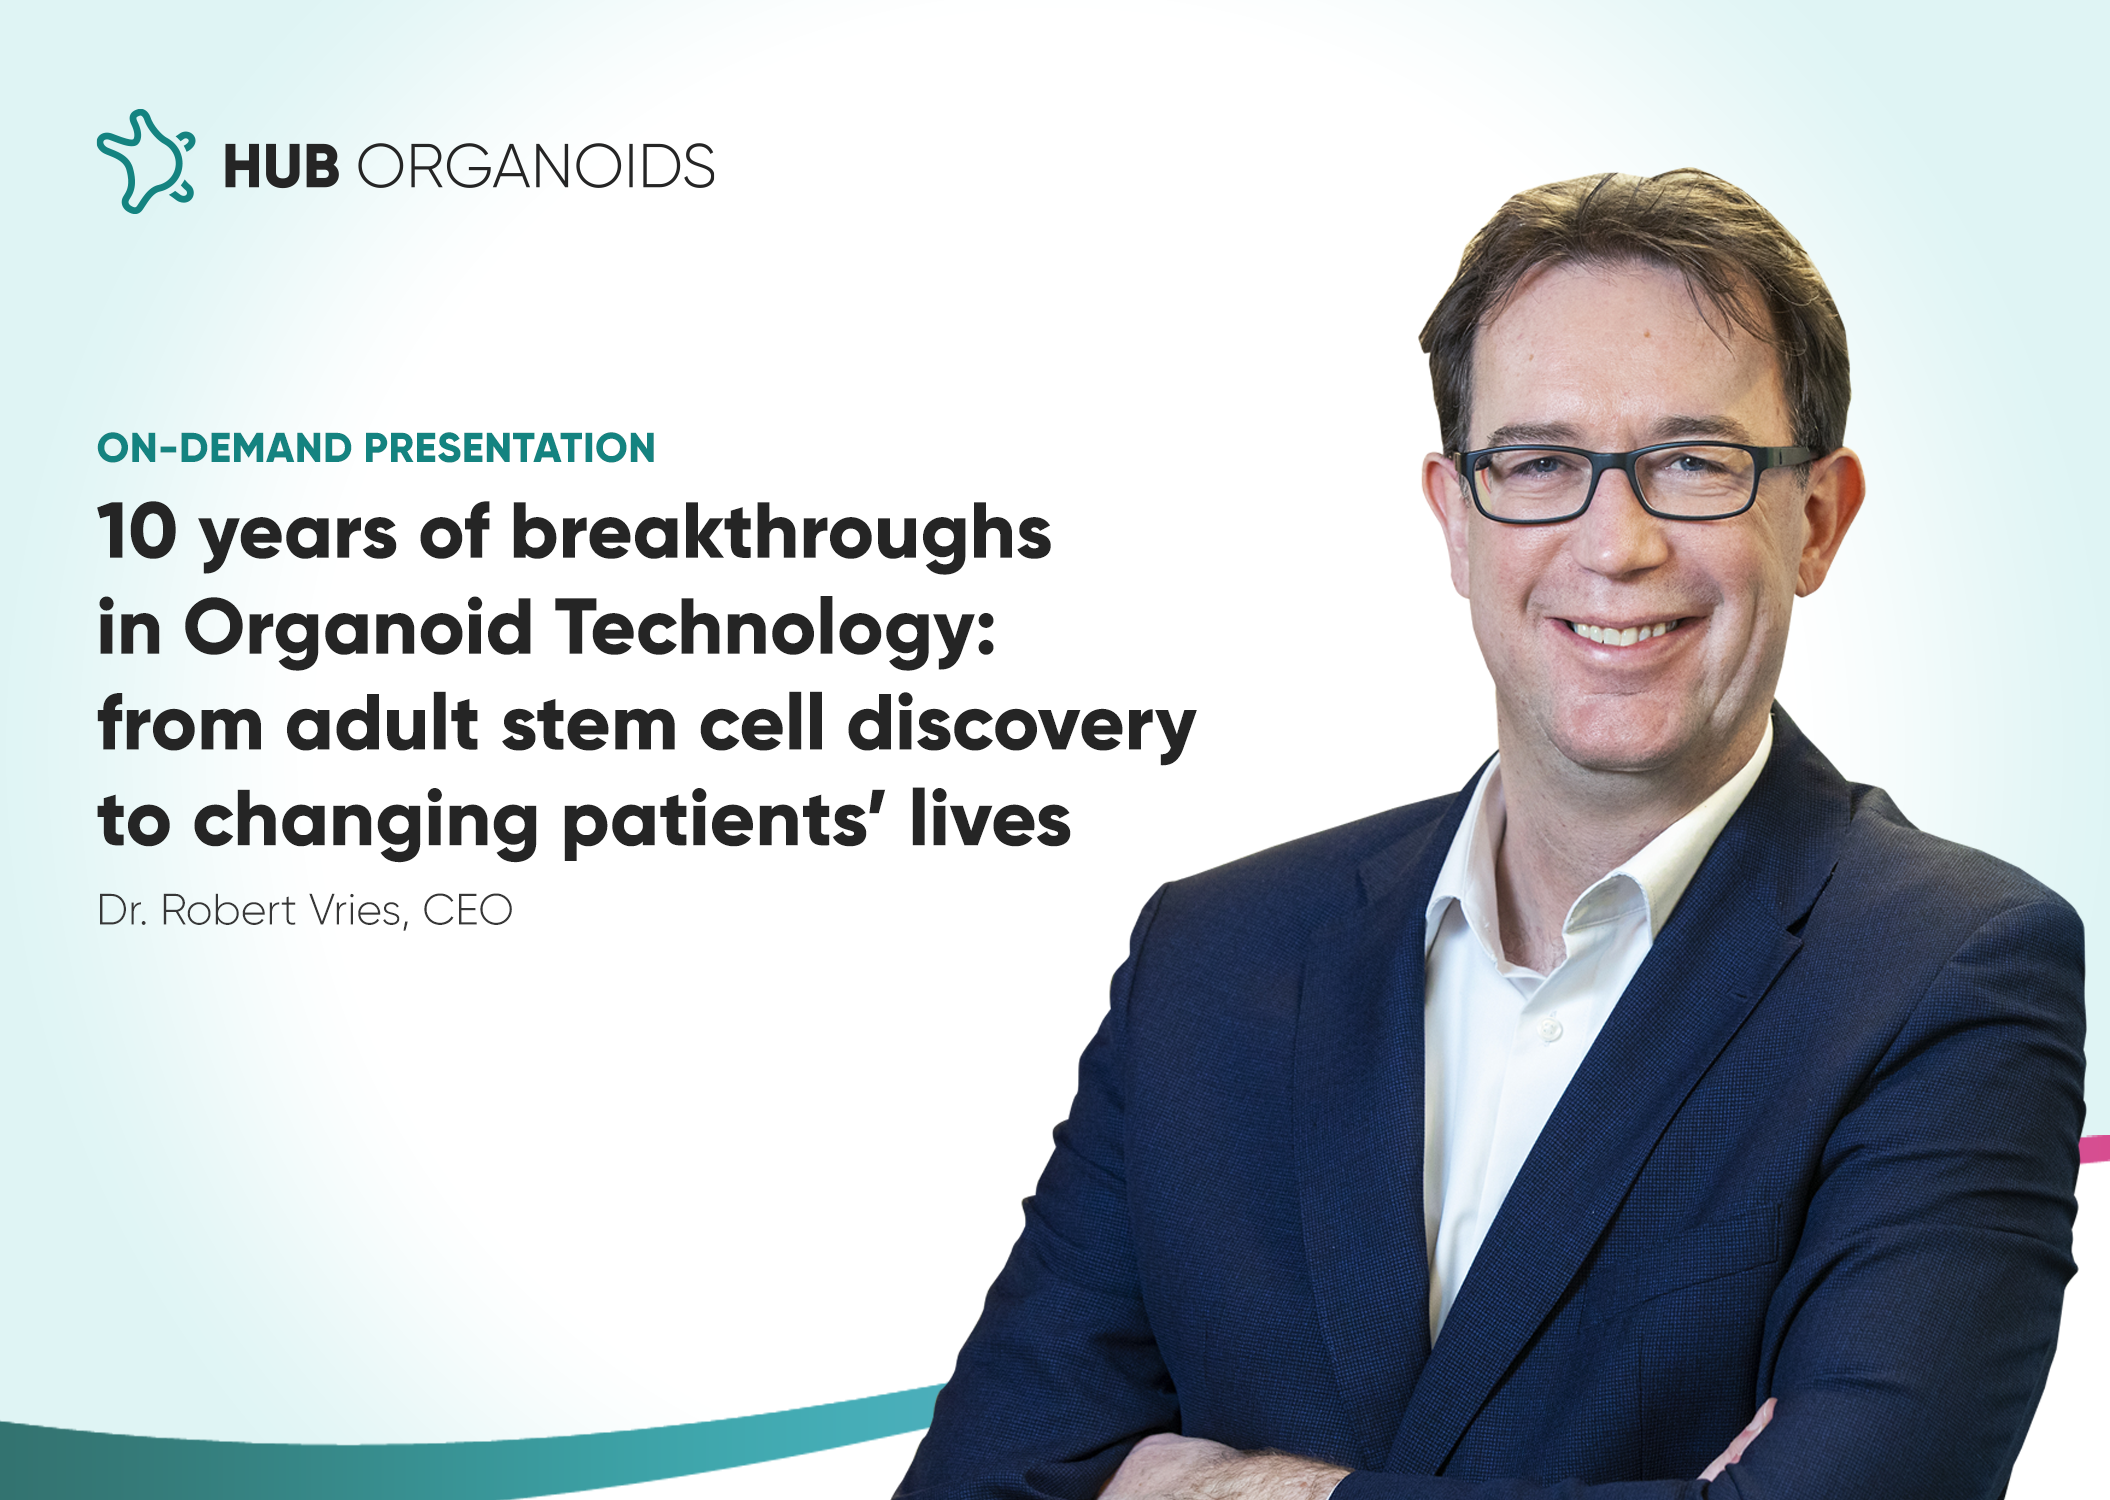 10 years of breakthroughs in Organoid Technology: from adult stem cell discovery to changing patients’ lives